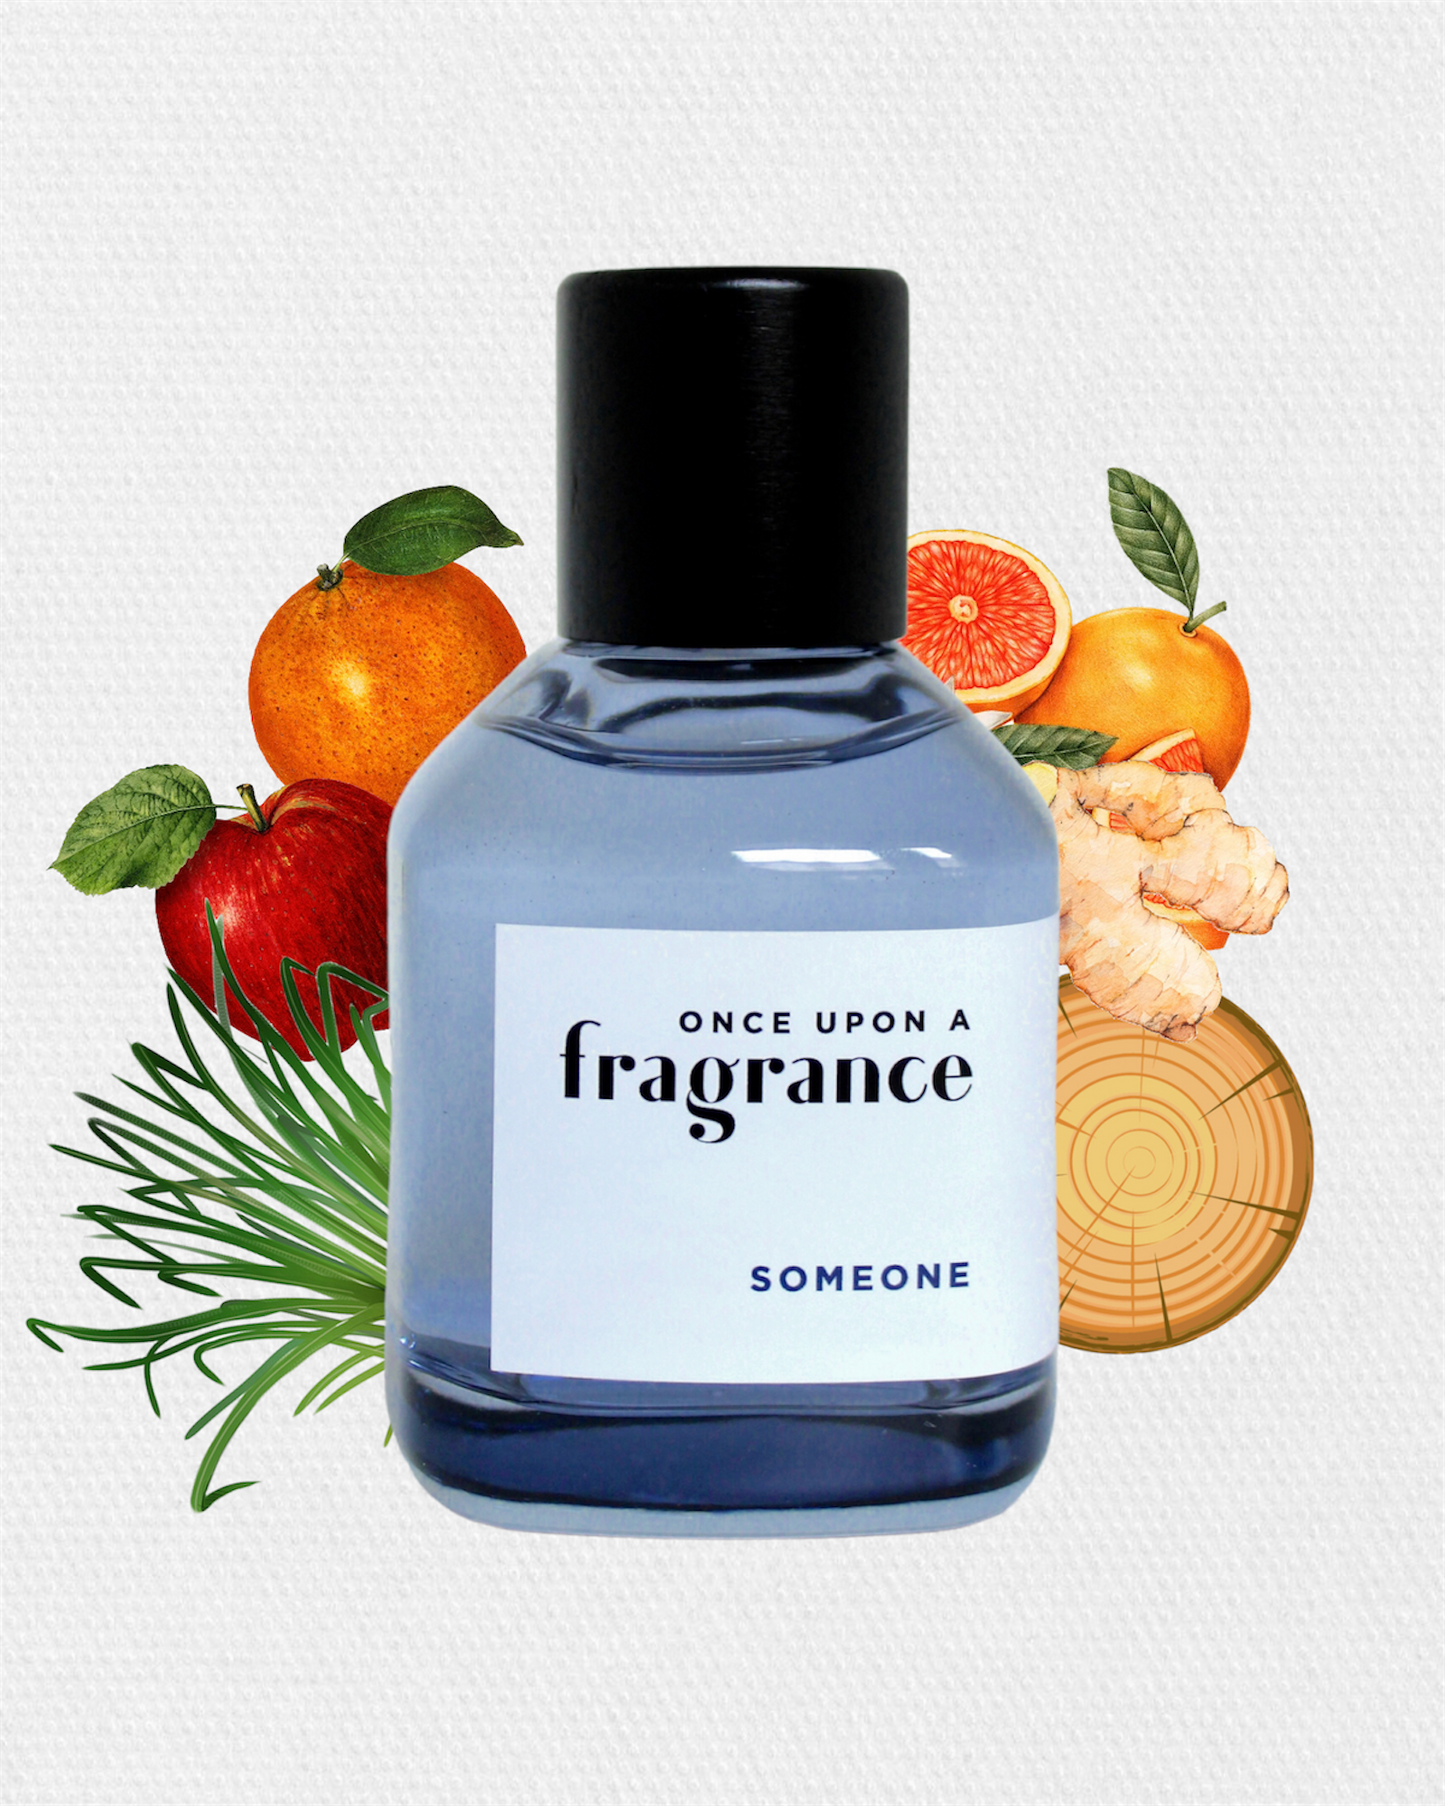 Eau de toilette ONCE UPON A FRAGRANCE without you - Spray of 100ml